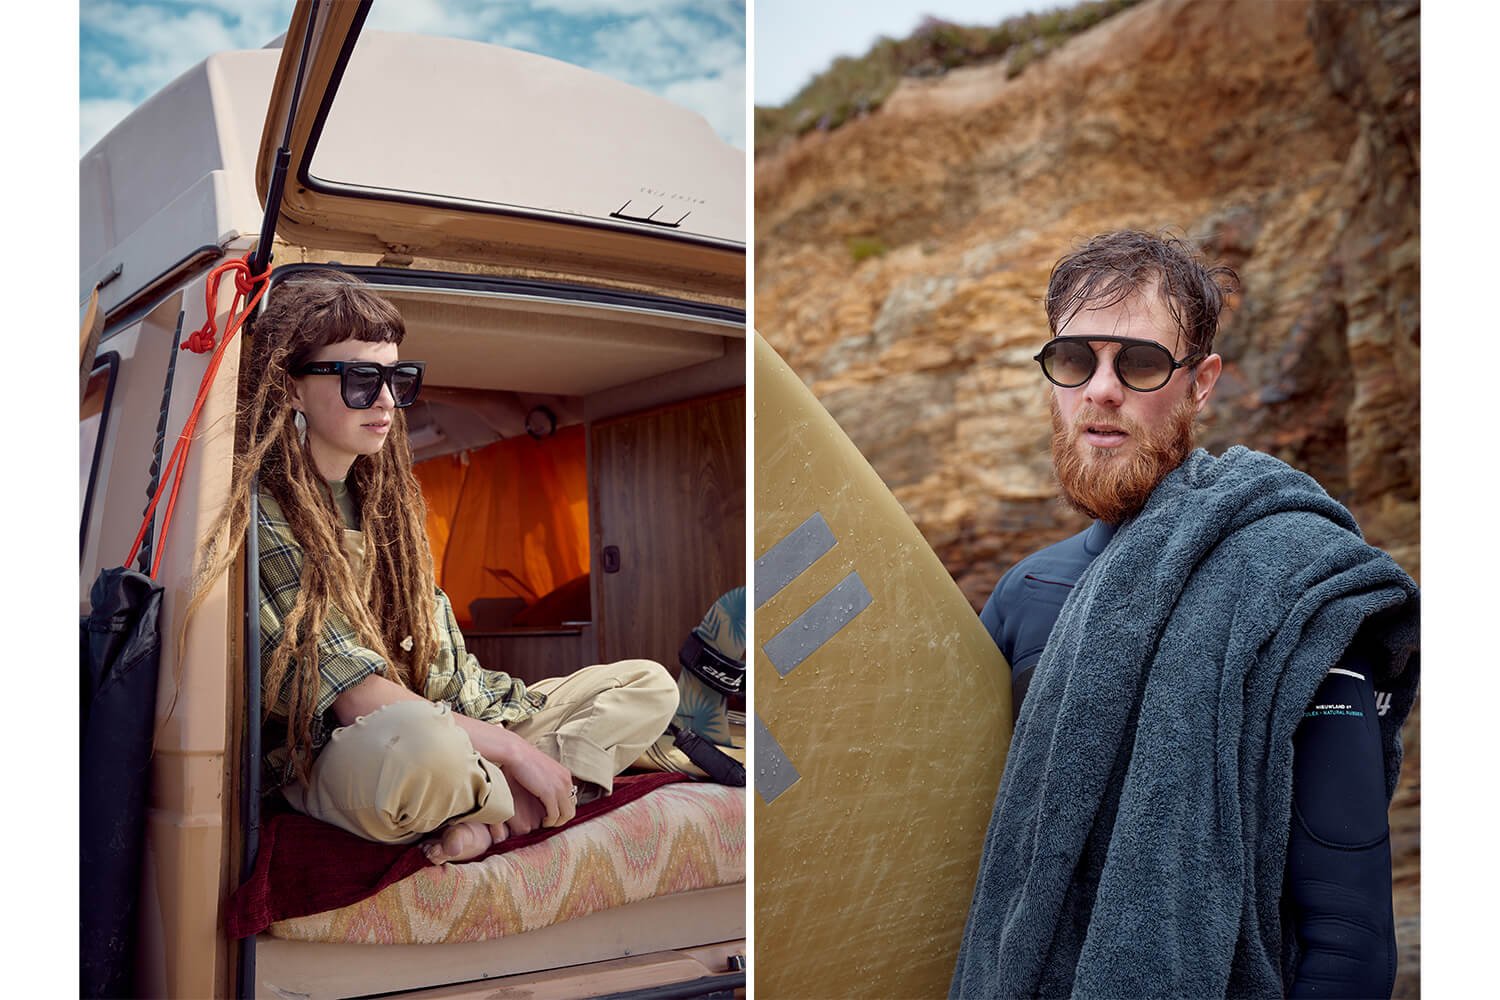 PEOPLE WEARING SUNGLASSES AT THE BEACH AND IN A CAMPERVAN